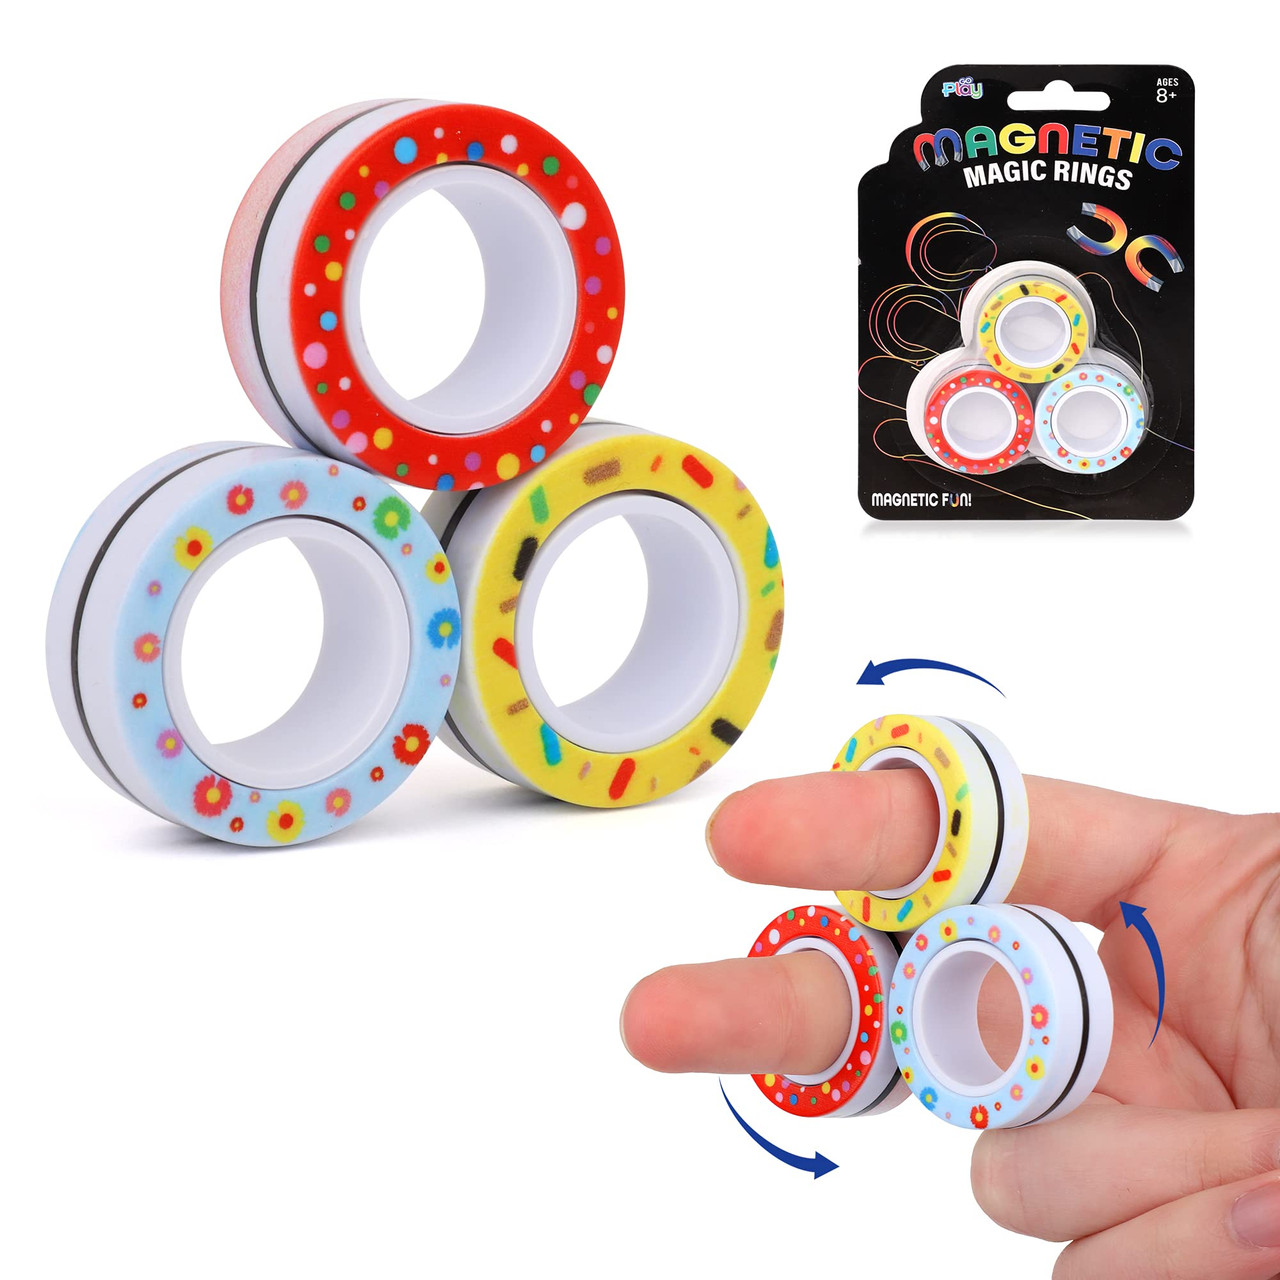 Pushmick 12 Pcs Finger Magnetic Rings Fidget Toys, Colorful Magnet Rings,  Great Fidget Rings for Training Relieves Reducer Autism Anxiety. :  Amazon.in: Toys & Games